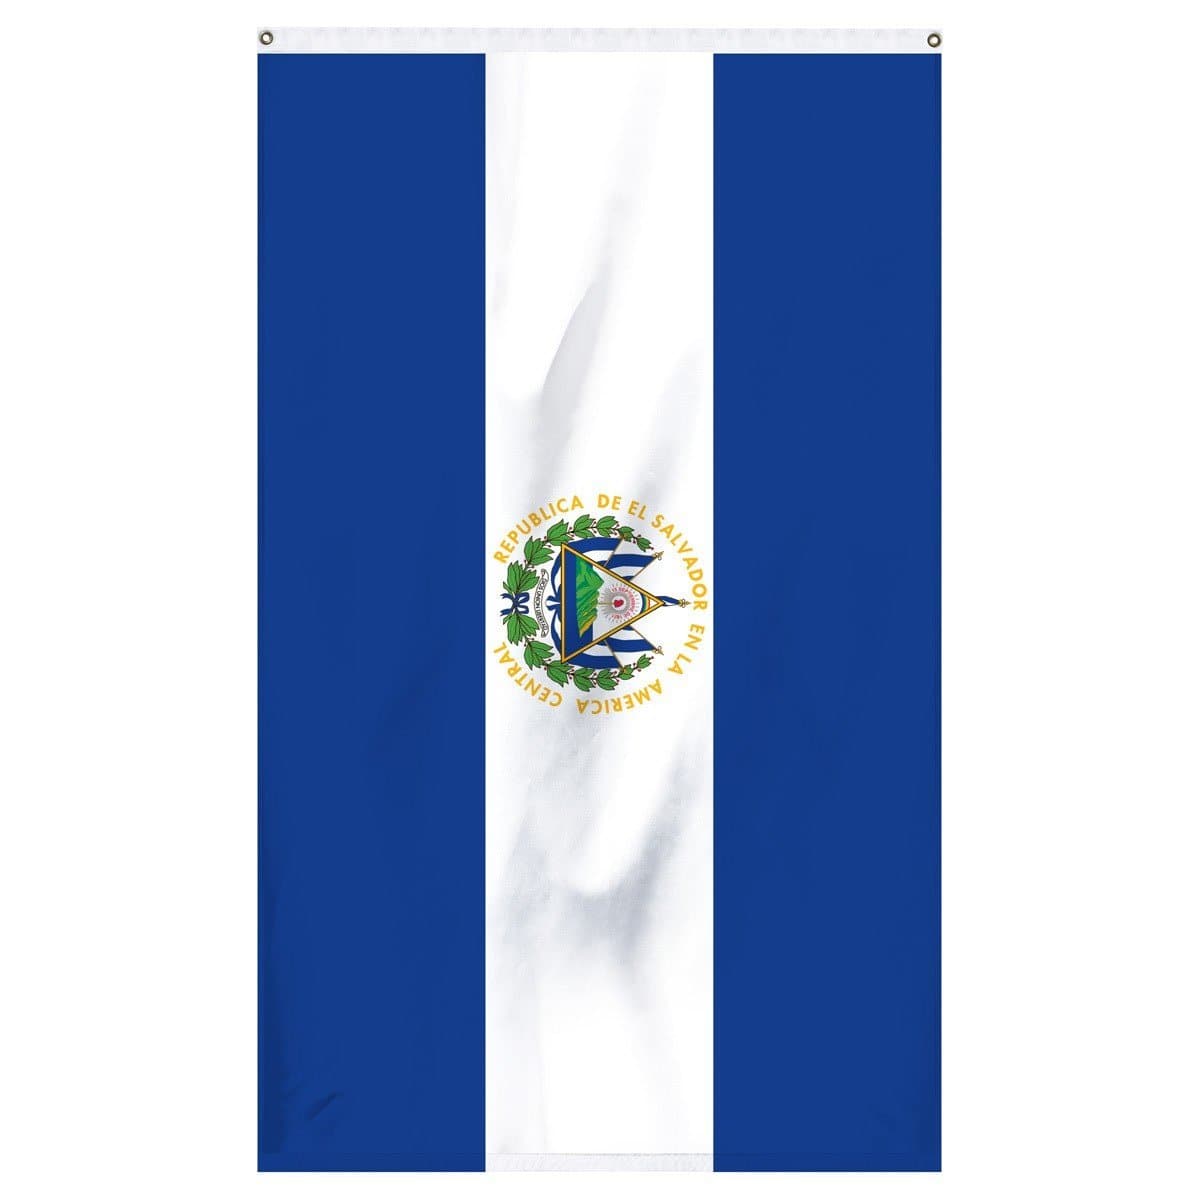 The national flag of El Salvador for sale for the tops of flagpoles